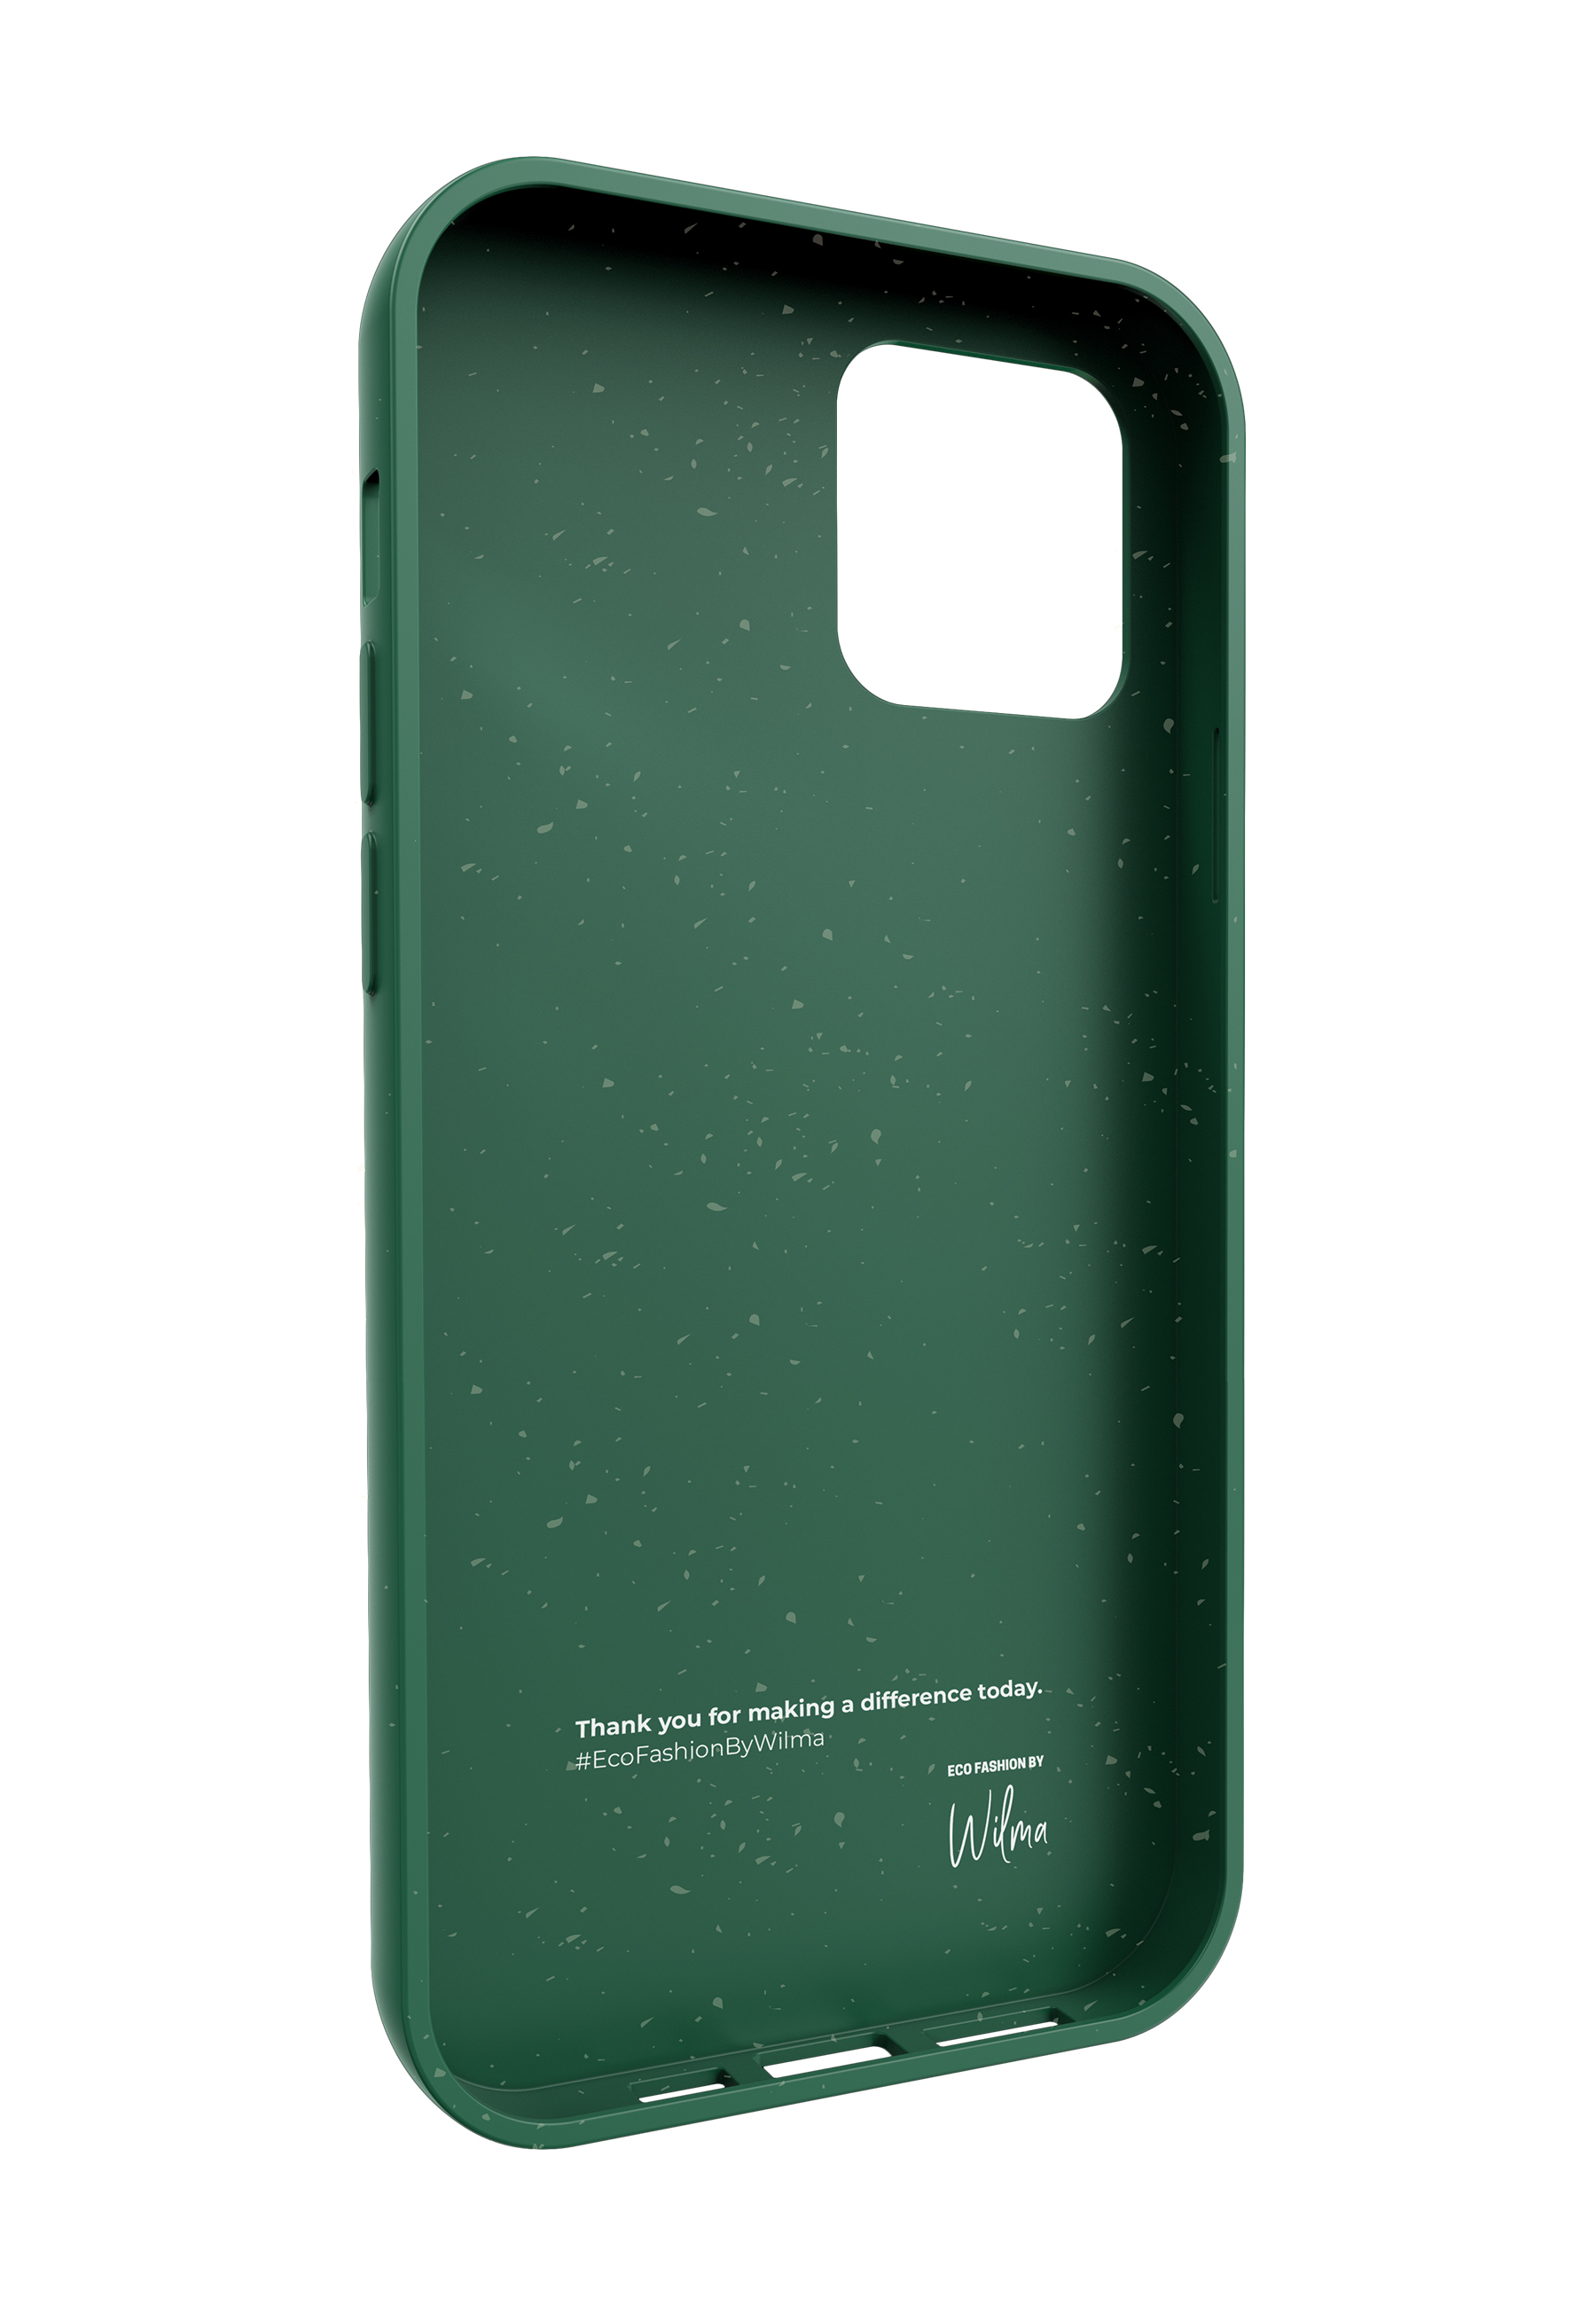 Backcover, BY ECO 12 P12PM, Pro WILMA iPhone FASHION Apple, green Max,